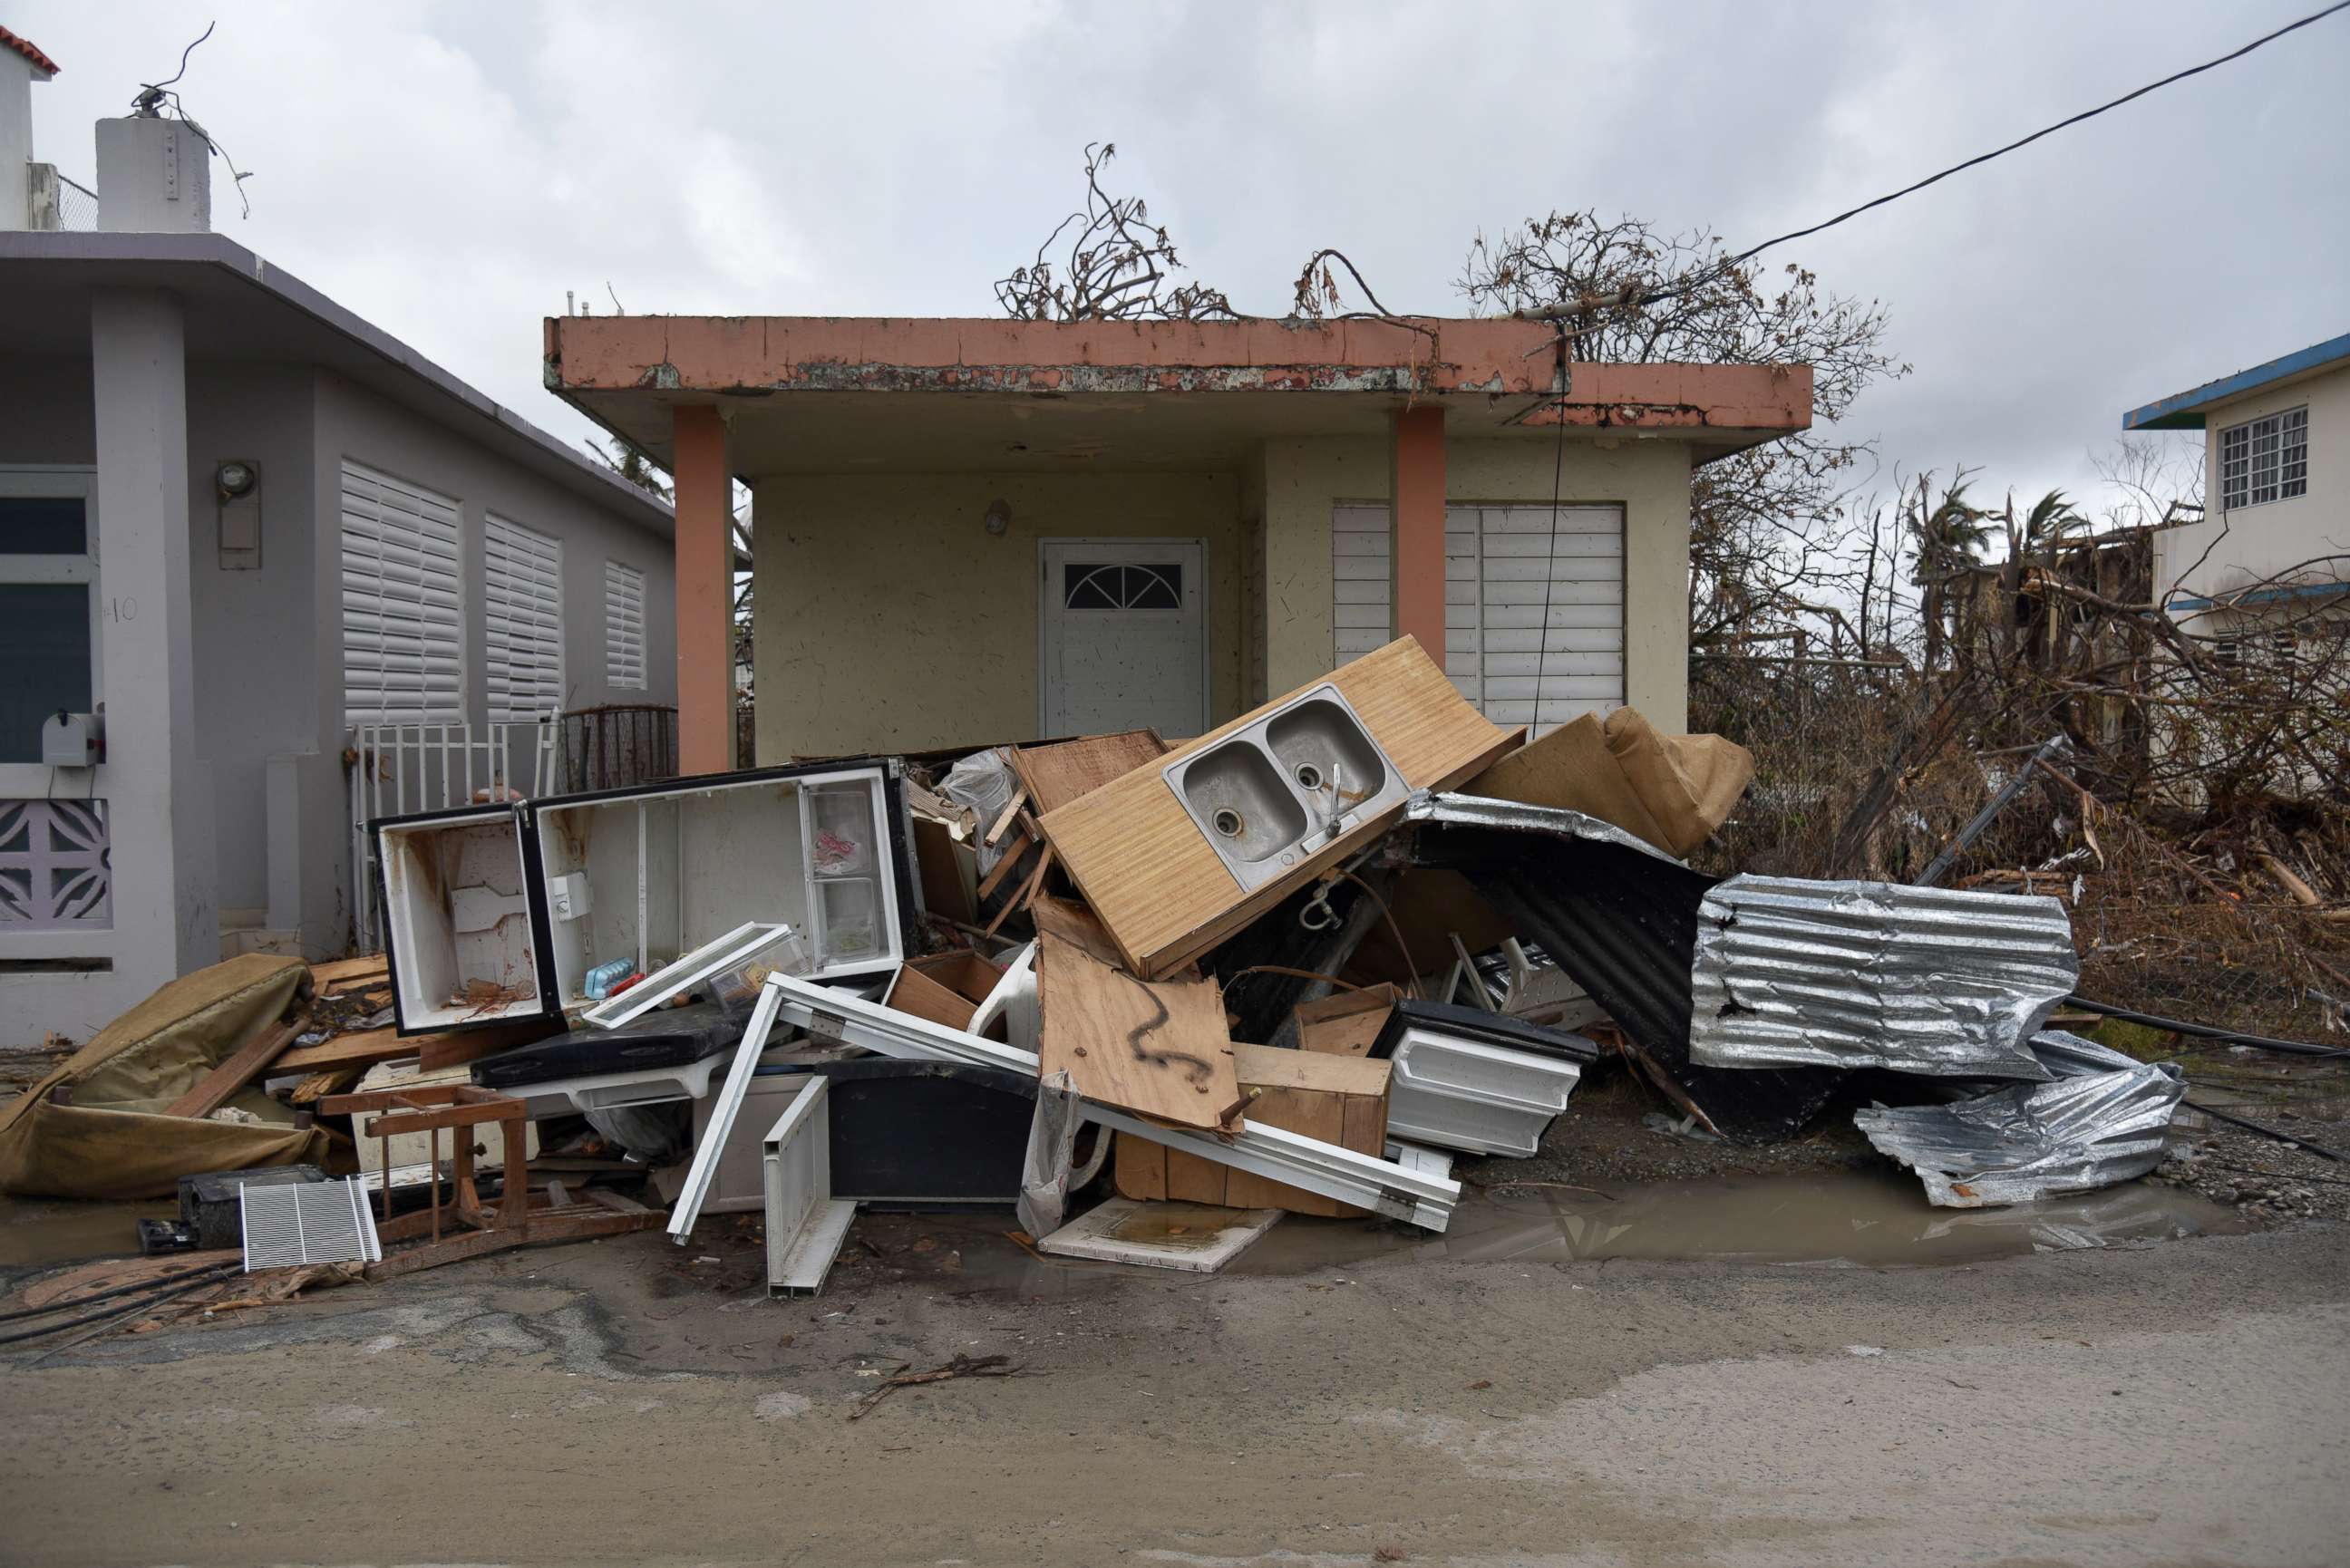 PHOTO: Damaged furniture is seen in front of a house in Punta Santiago, Humacao, Puerto Rico, Sept. 27, 2017, one week after the passage of Hurricane Maria.